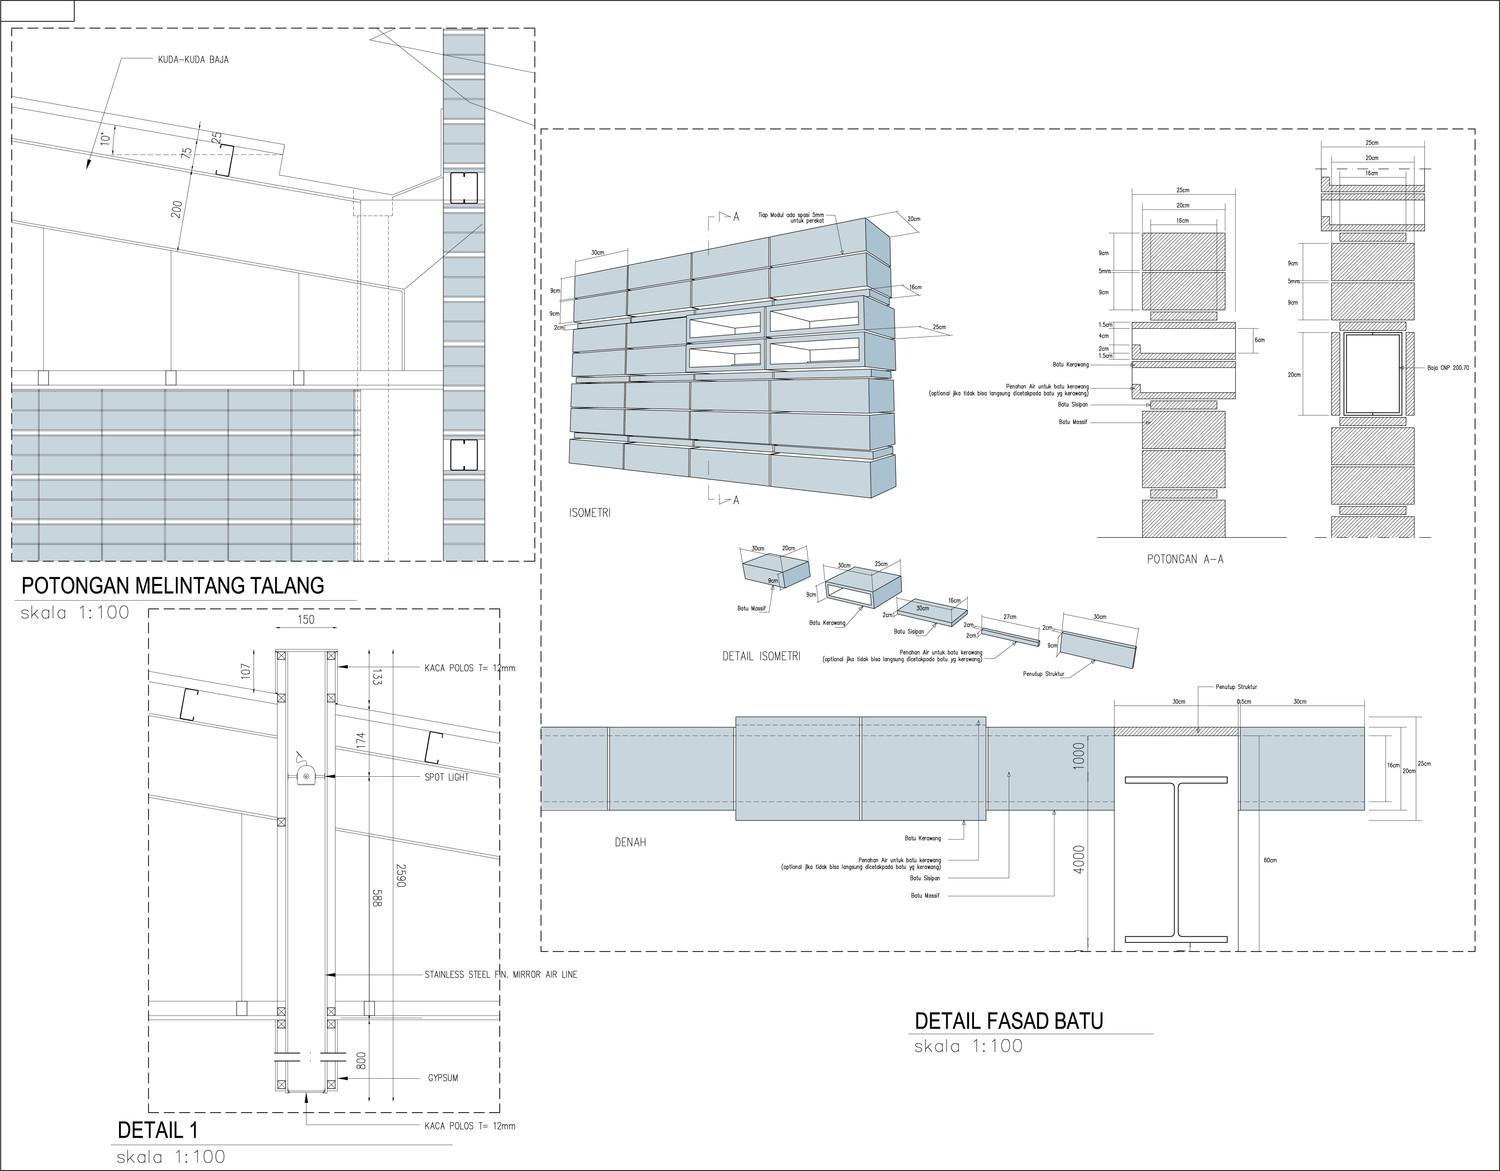 Technical drawing of building façade